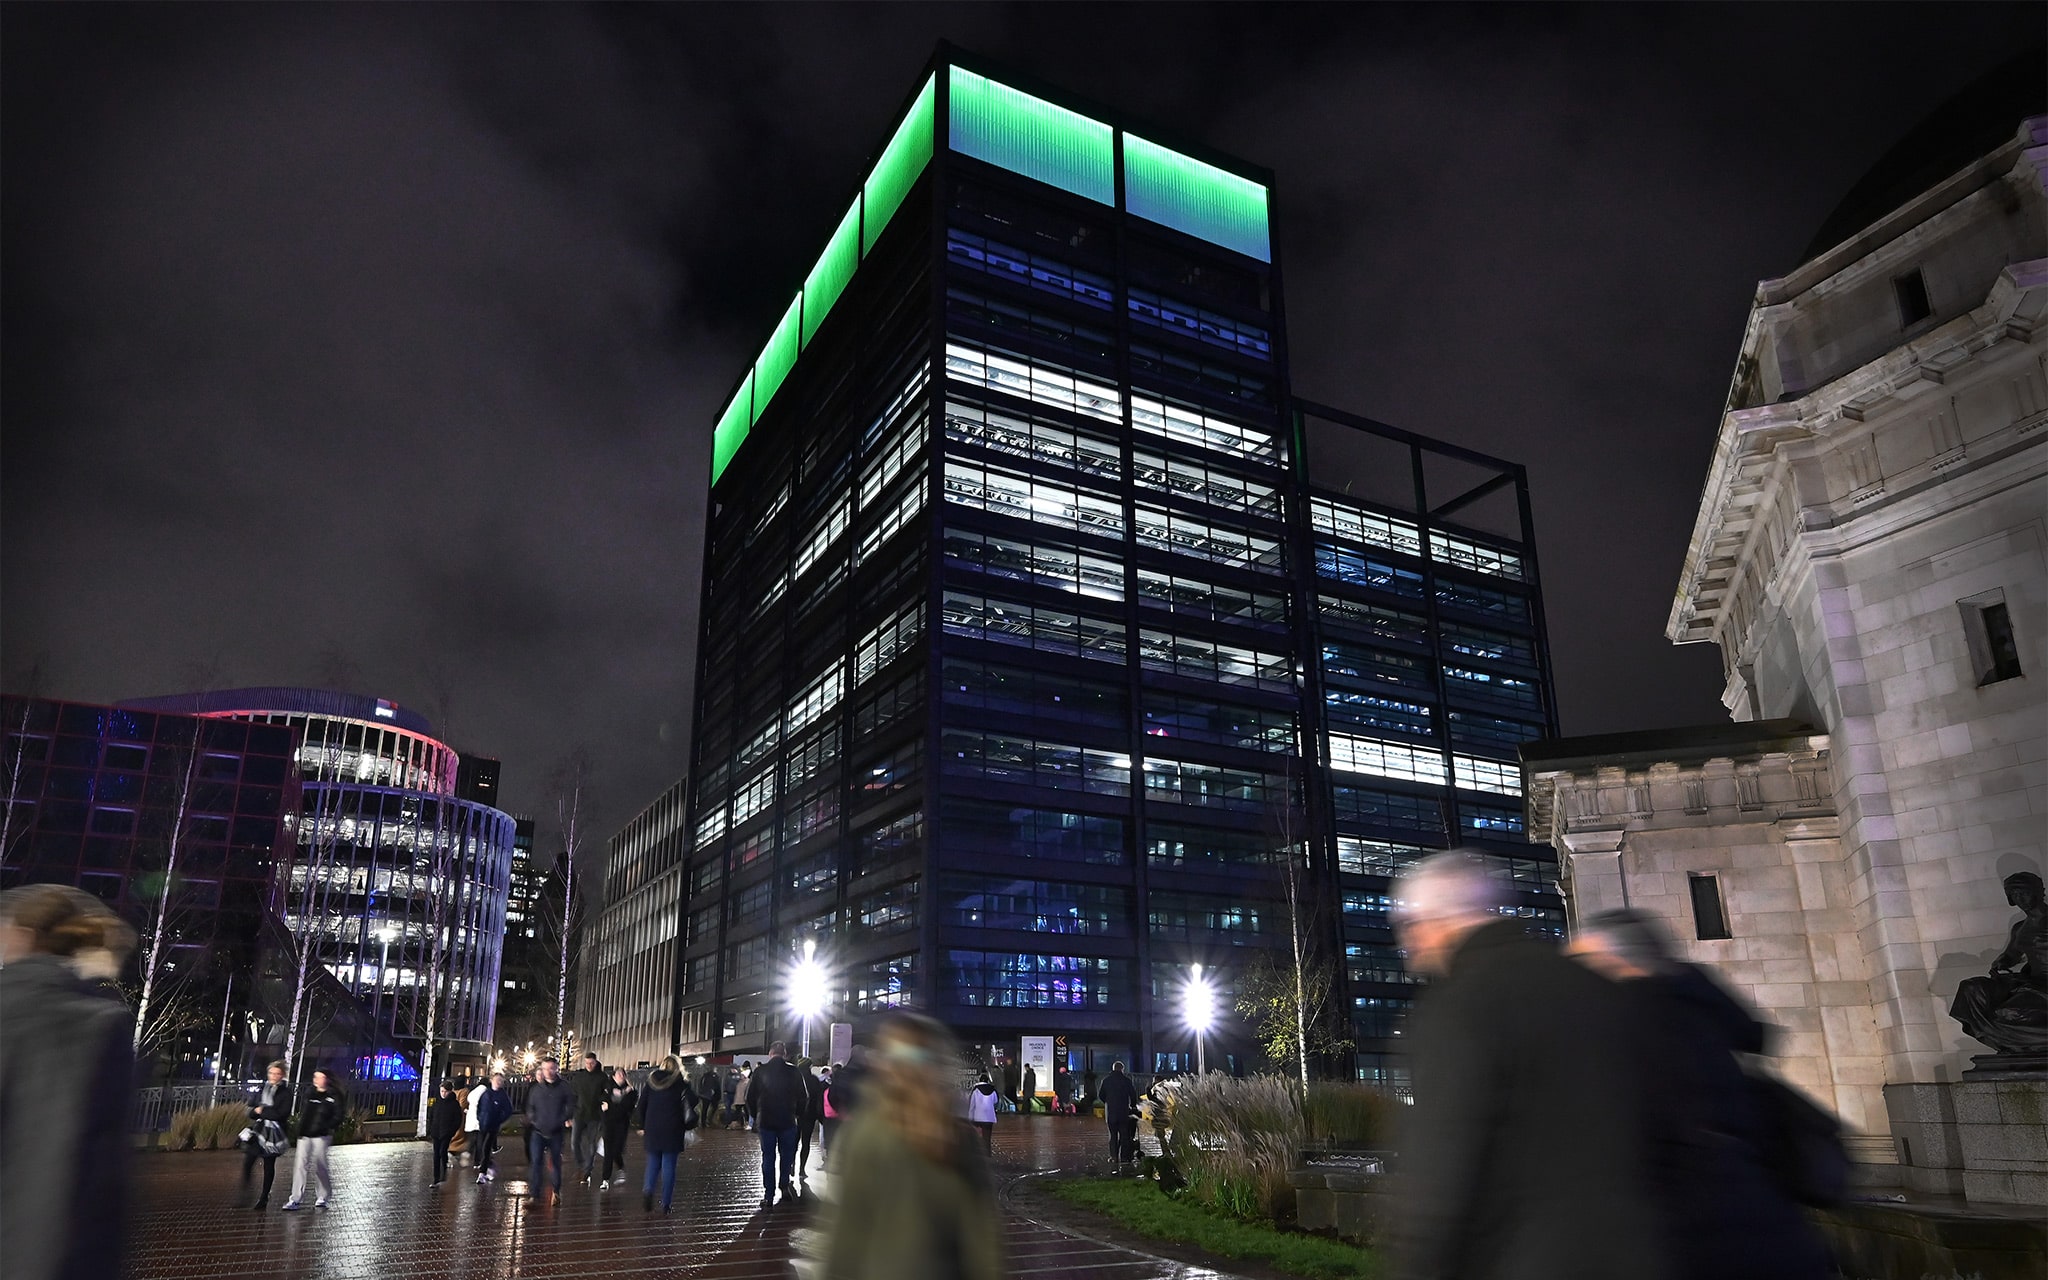 One Centenary Way, Paradise Birmingham with the glass lantern lit up at night.